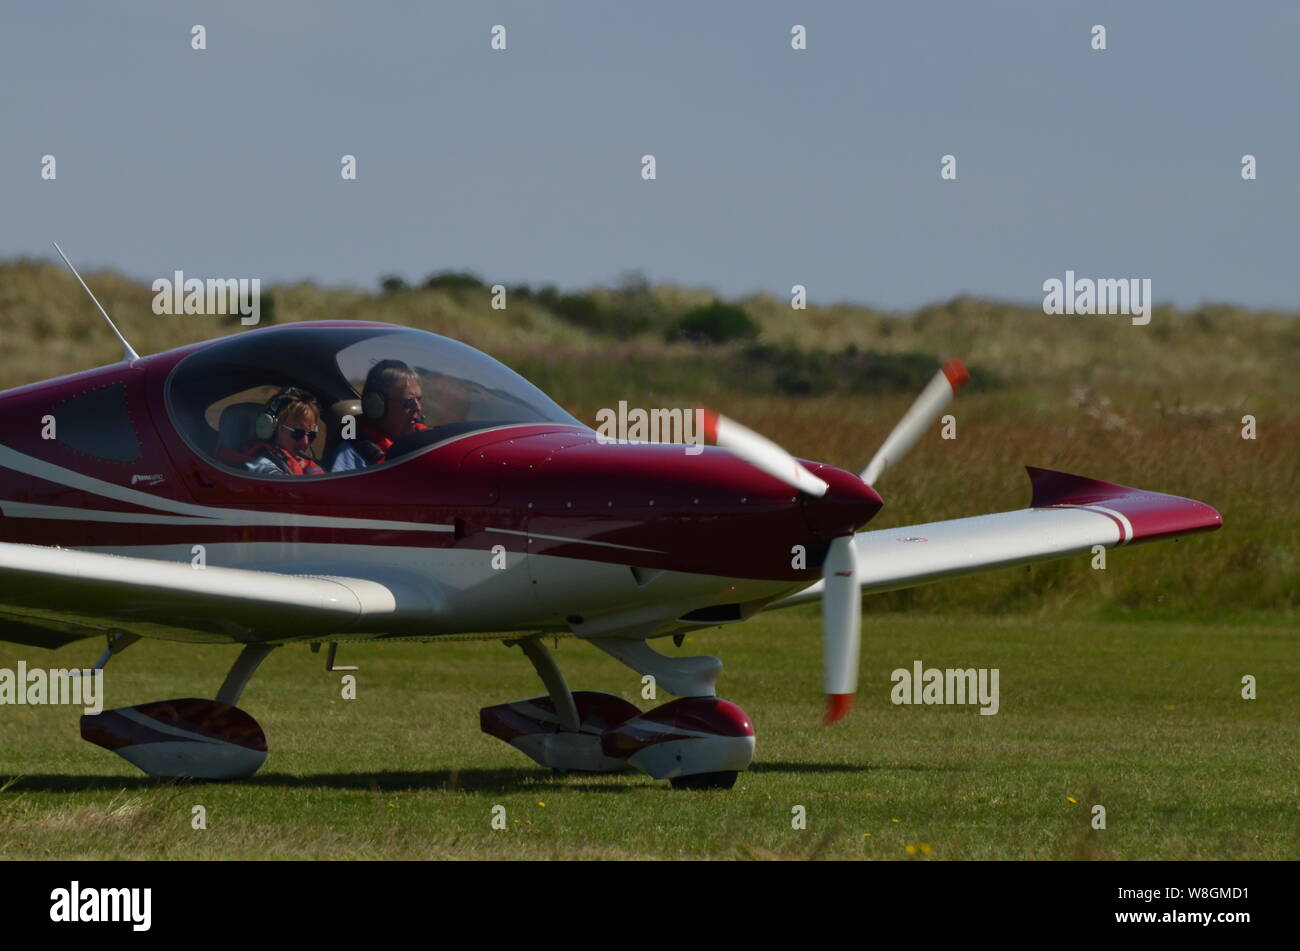 A Tri-R KIS TR-1 single engine light aircraft on the ground at Dornoch Airstrip, Scottish Highlands, as part of the annual Dornoch Fly-In, 2019. Stock Photo